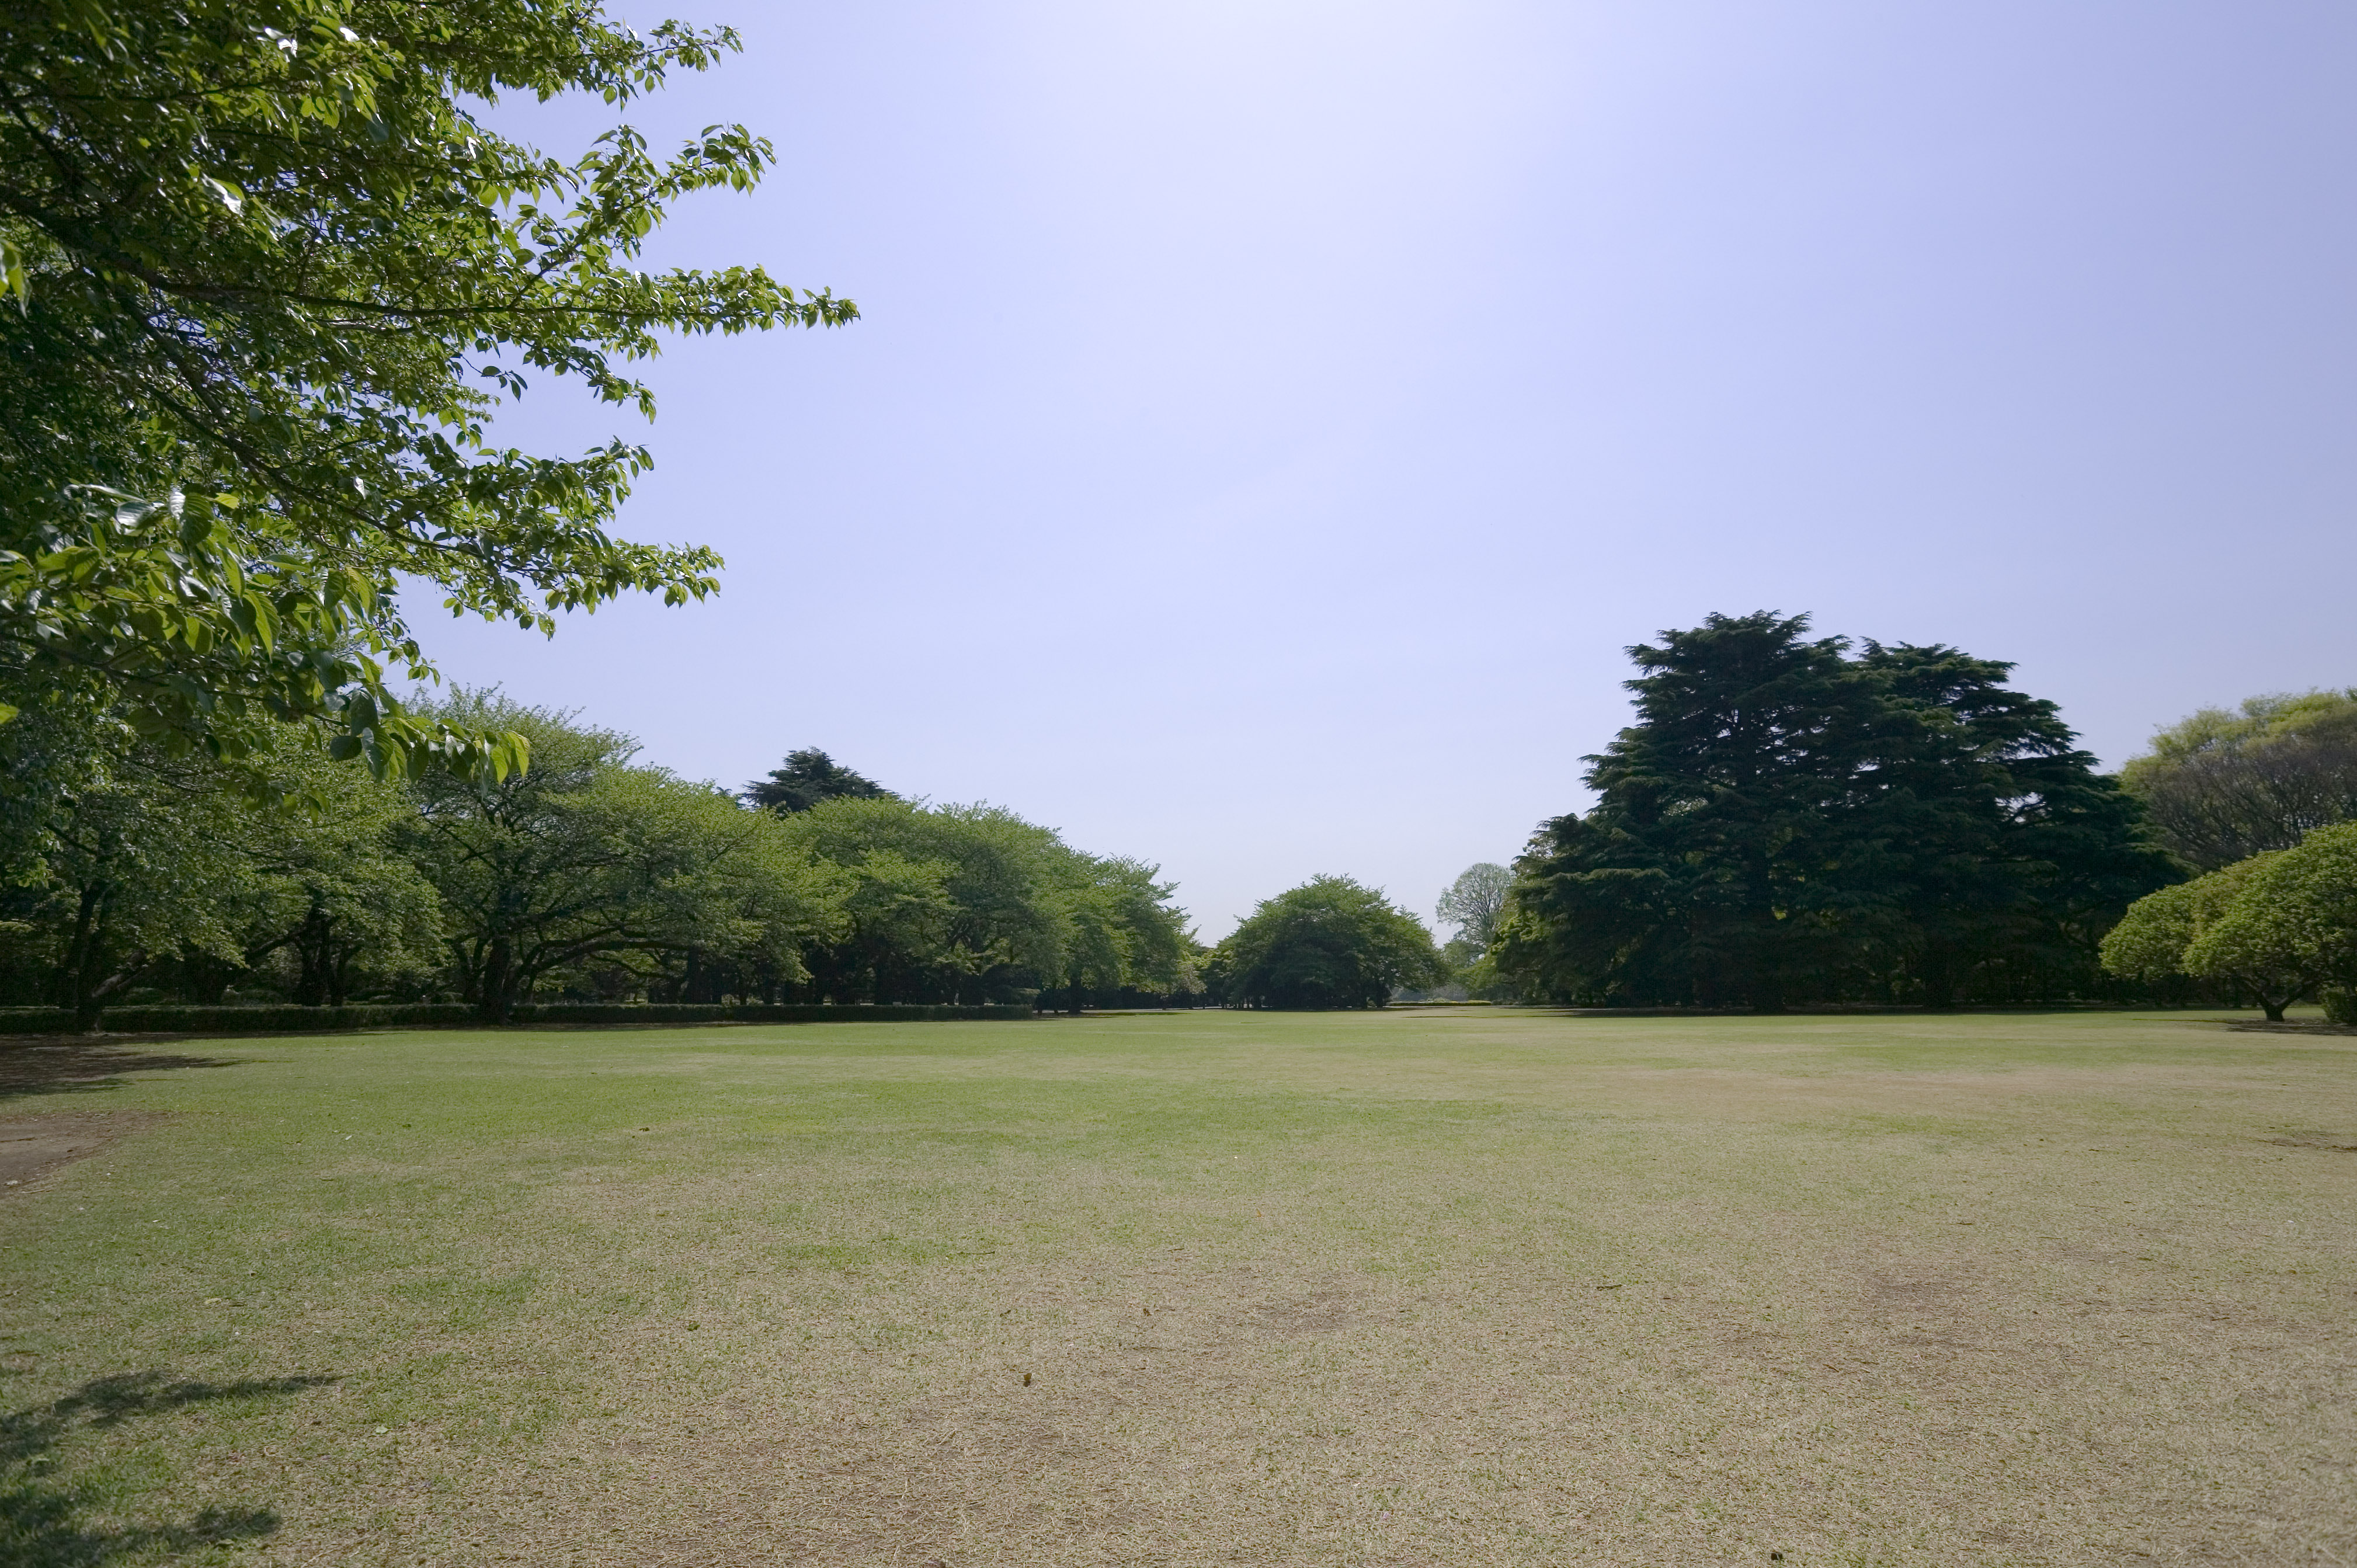 photo,material,free,landscape,picture,stock photo,Creative Commons,A lawn of a park, lawn, , open space, tree